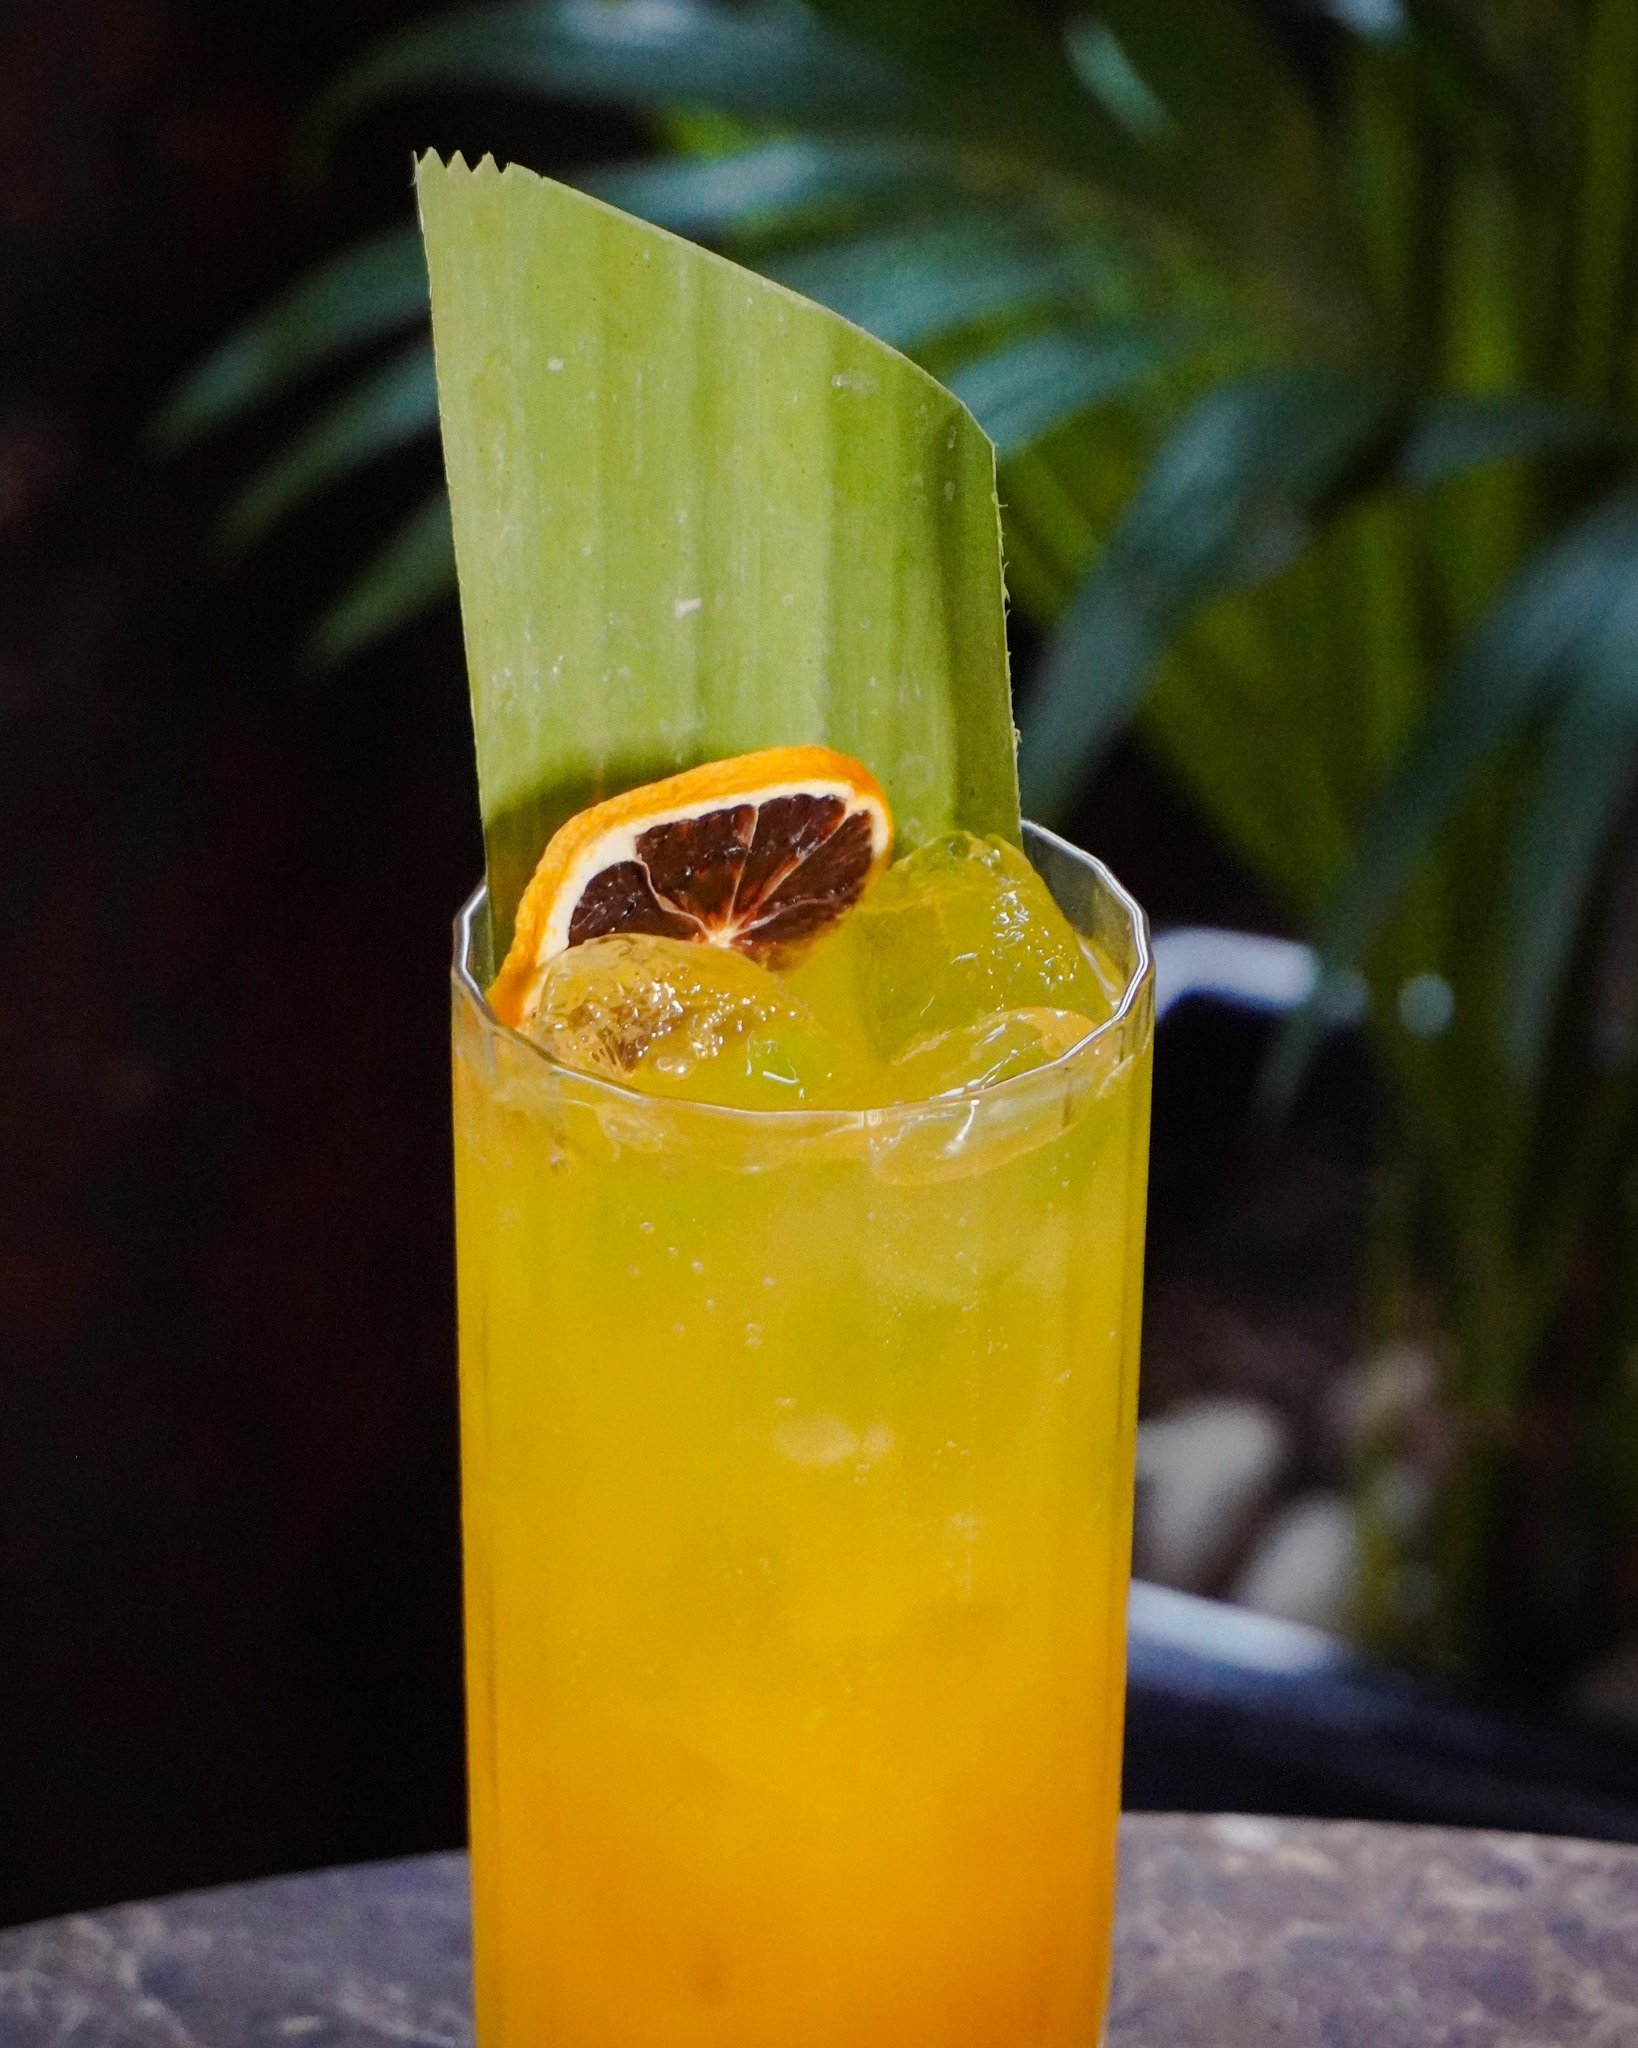 Has the sunshine got you craving a refreshing drink? ☀🤔

Introducing the Mango Collins 🍸

This cocktail is crafted with the finest Tanqueray gin and combines the sweetness of mango with the floral notes of Kwai Feh liqueur. A splash of lemon adds a